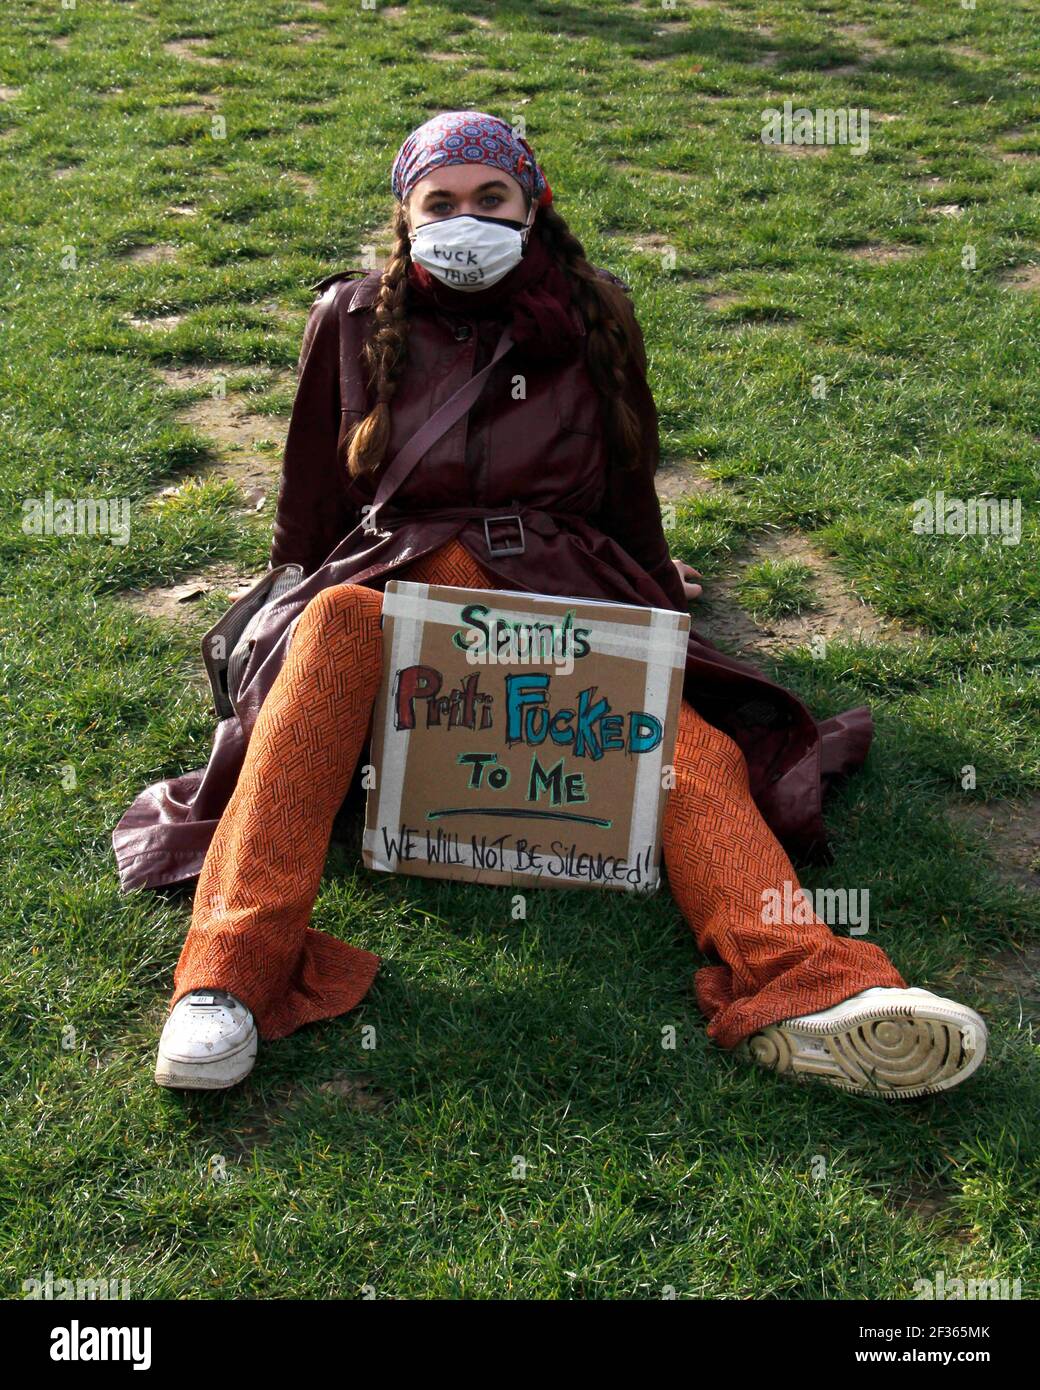 London, UK. 15th Mar, 2021. Protester sits on the grass, waiting for the event to begin with a sign opposing Priti Patel's new right to protest law. London. 15th March 2021. Credit: One Up Top Editorial Images/Alamy Live News Stock Photo